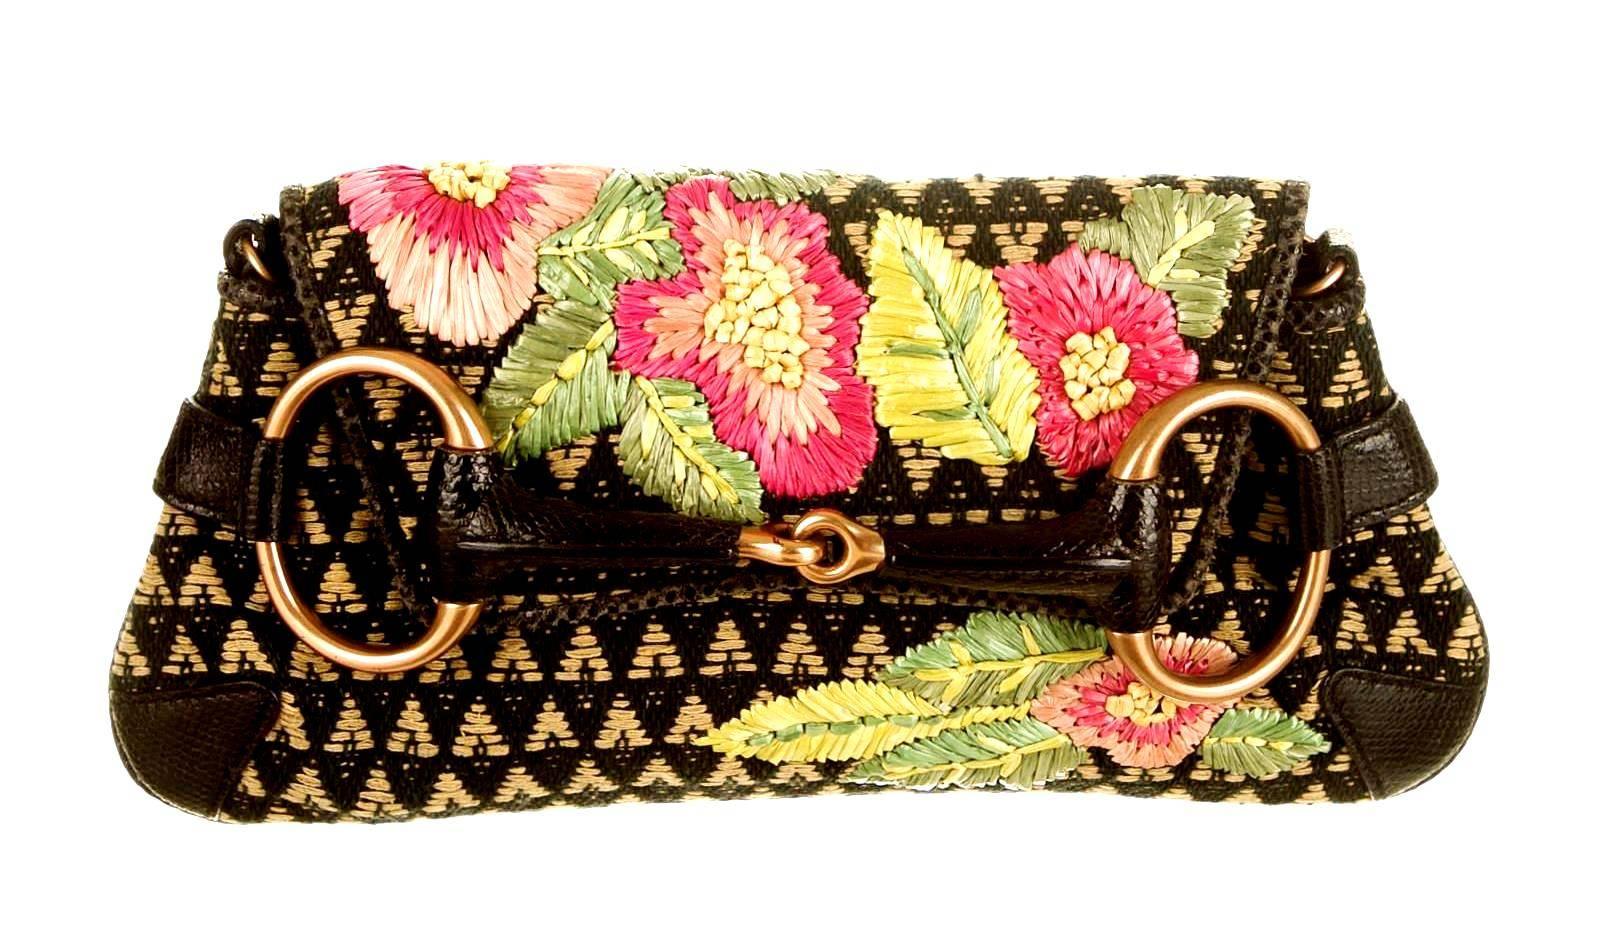 Stunning GUCCI signature horsebit flap bag
Amazing piece of work - handwoven raffia with floral embroidery
Black real exotic skin trimming - no print
Matt gold hardware
Fully lined with aqua-colored fabric
Single slit pocket inside
Removable